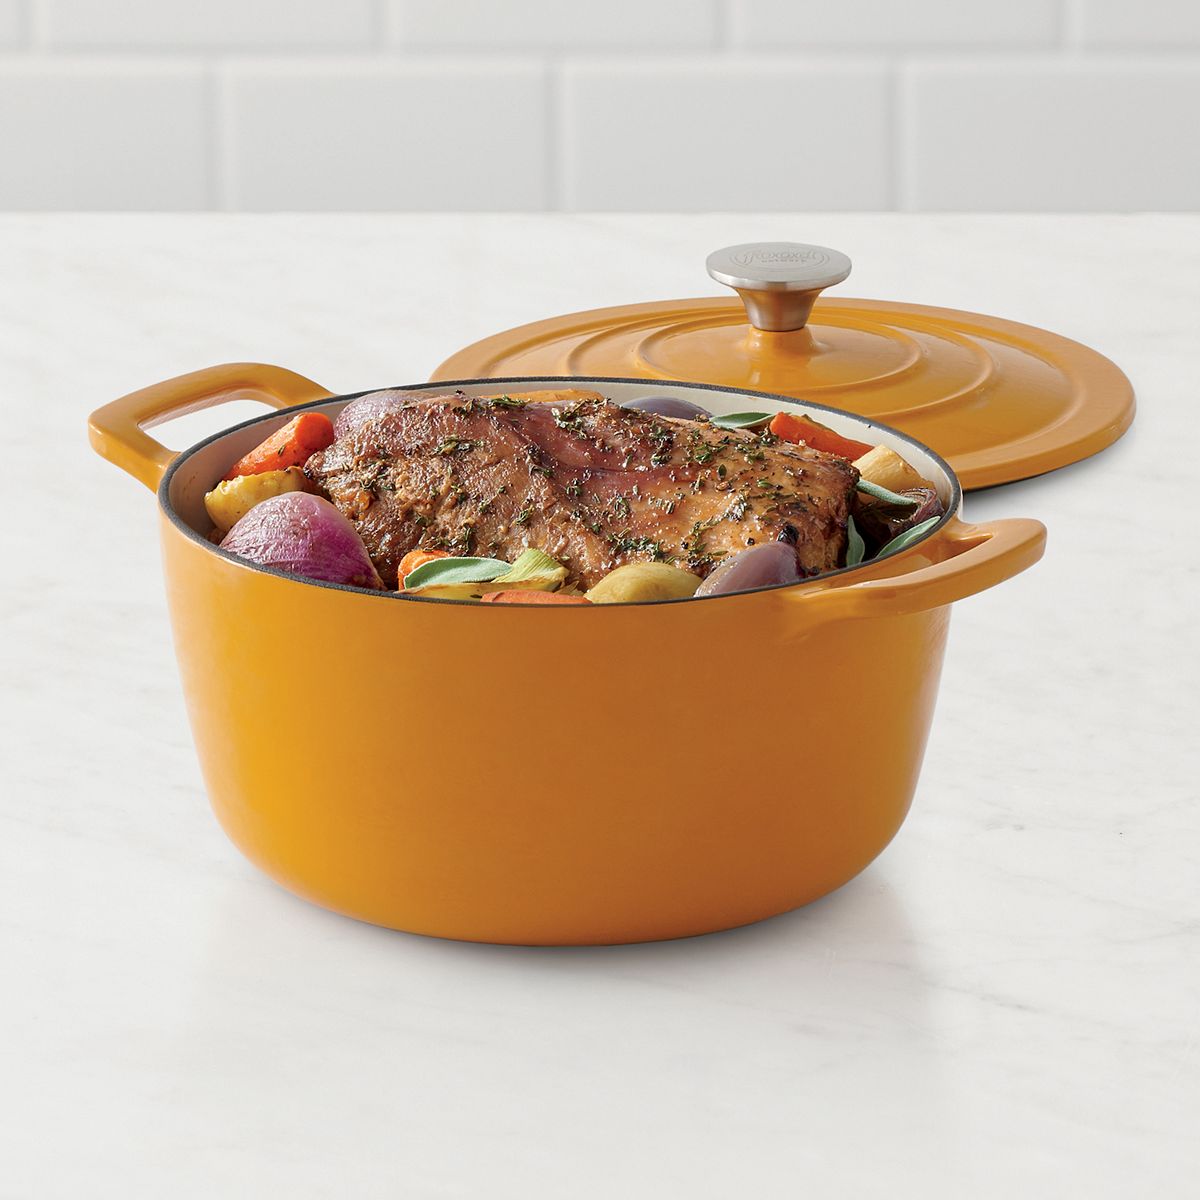 5-Quart Food Network Enameled Cast Iron Dutch Oven is on sale for $39.99